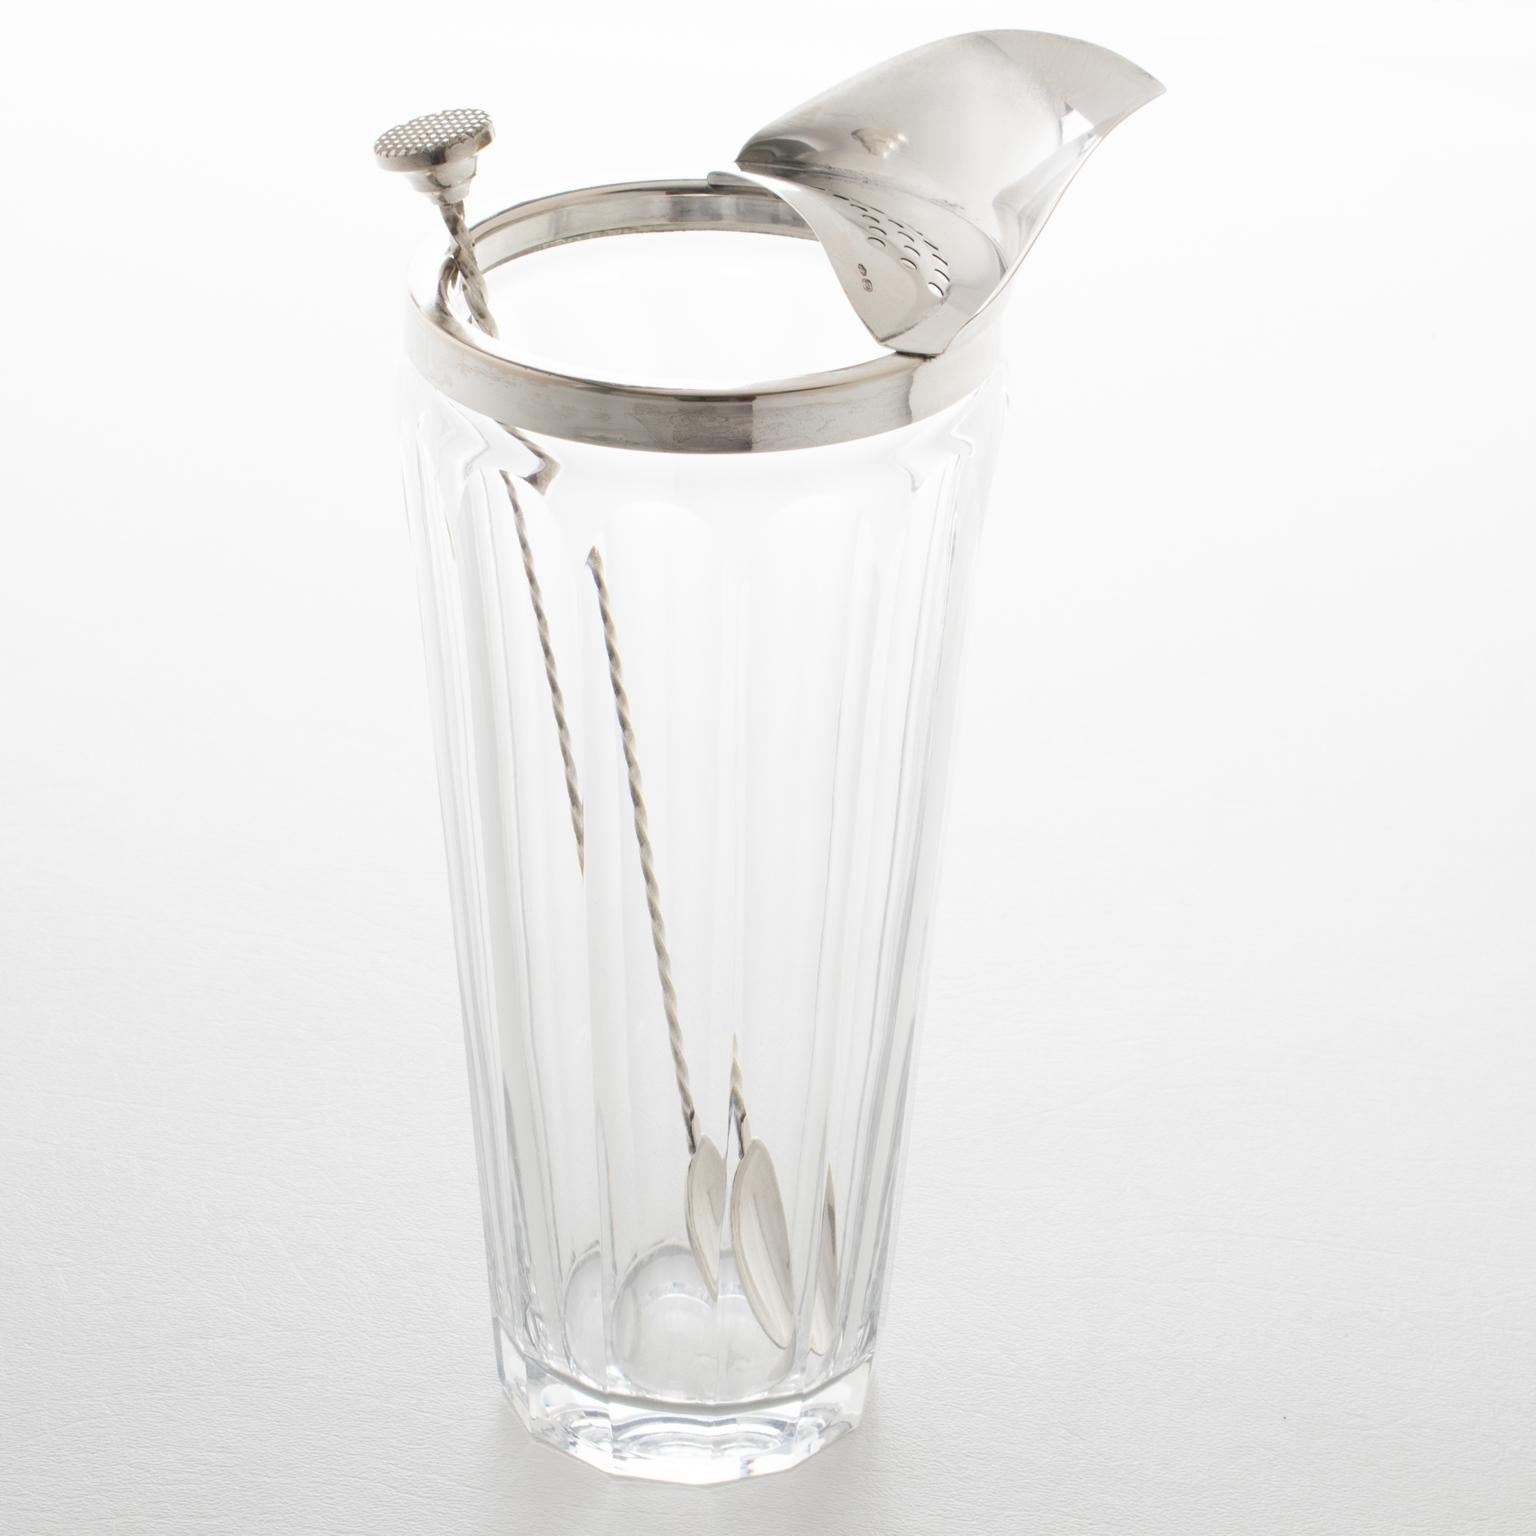 Italian silversmith Ugo Sandrucci crafted this elegant Art Deco barware set in the 1940s. This set of cocktail essentials boasts a sleek modernist design and a functional shape. The tall Martini pitcher or mixer jug is made of cut crystal and